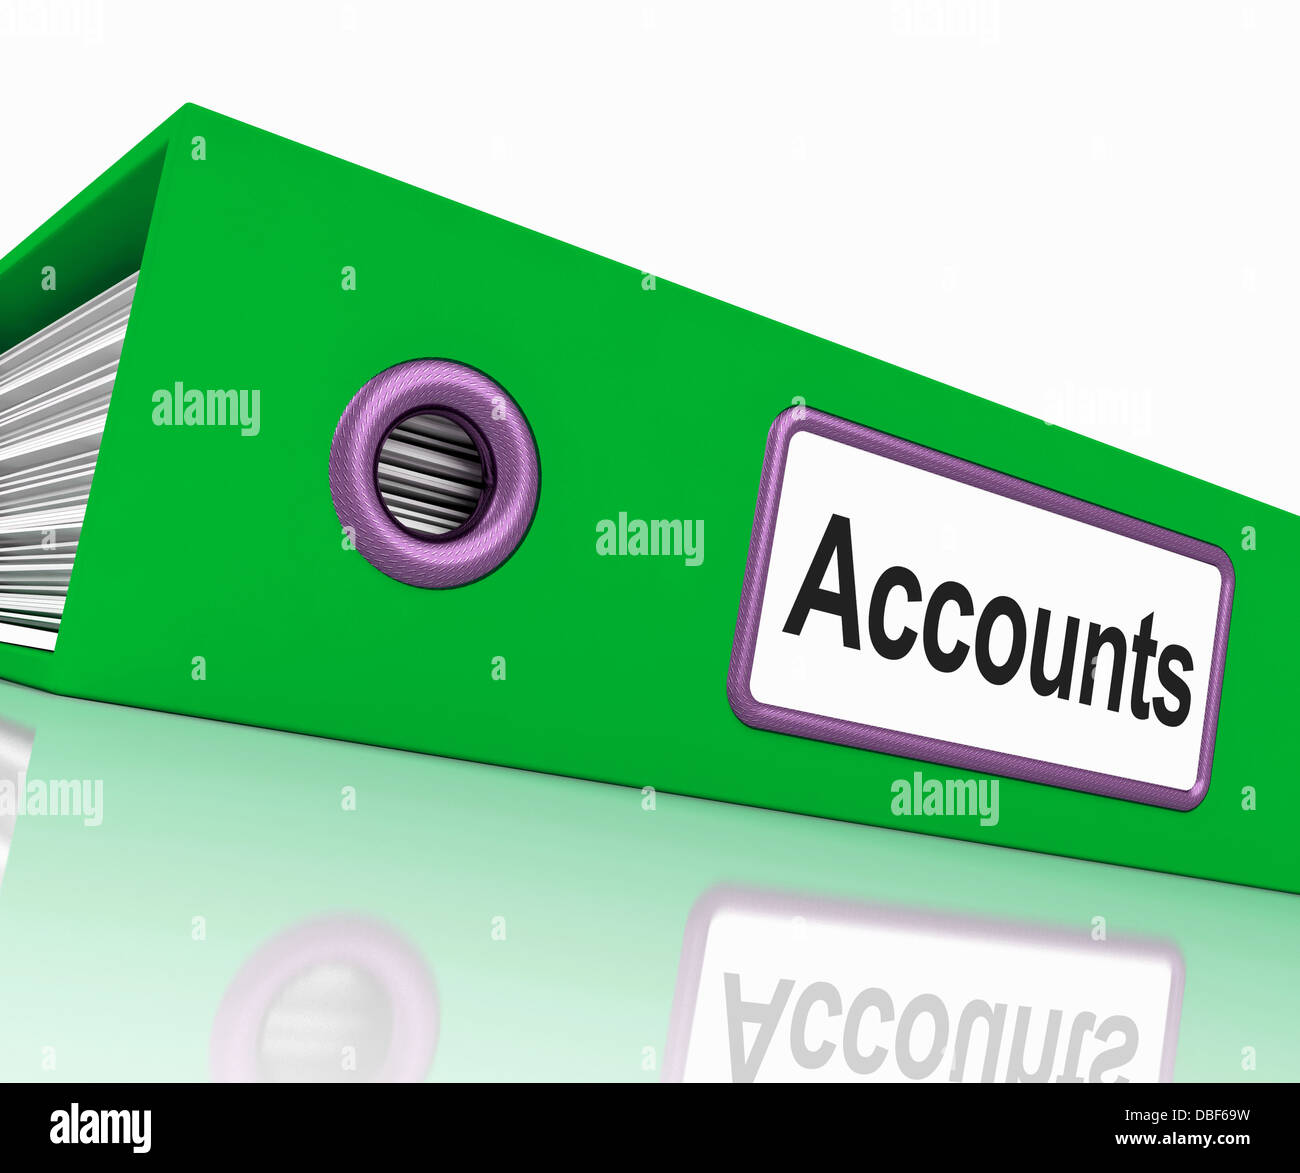 Accounts File Shows Accounting Profit And Expenses Stock Photo